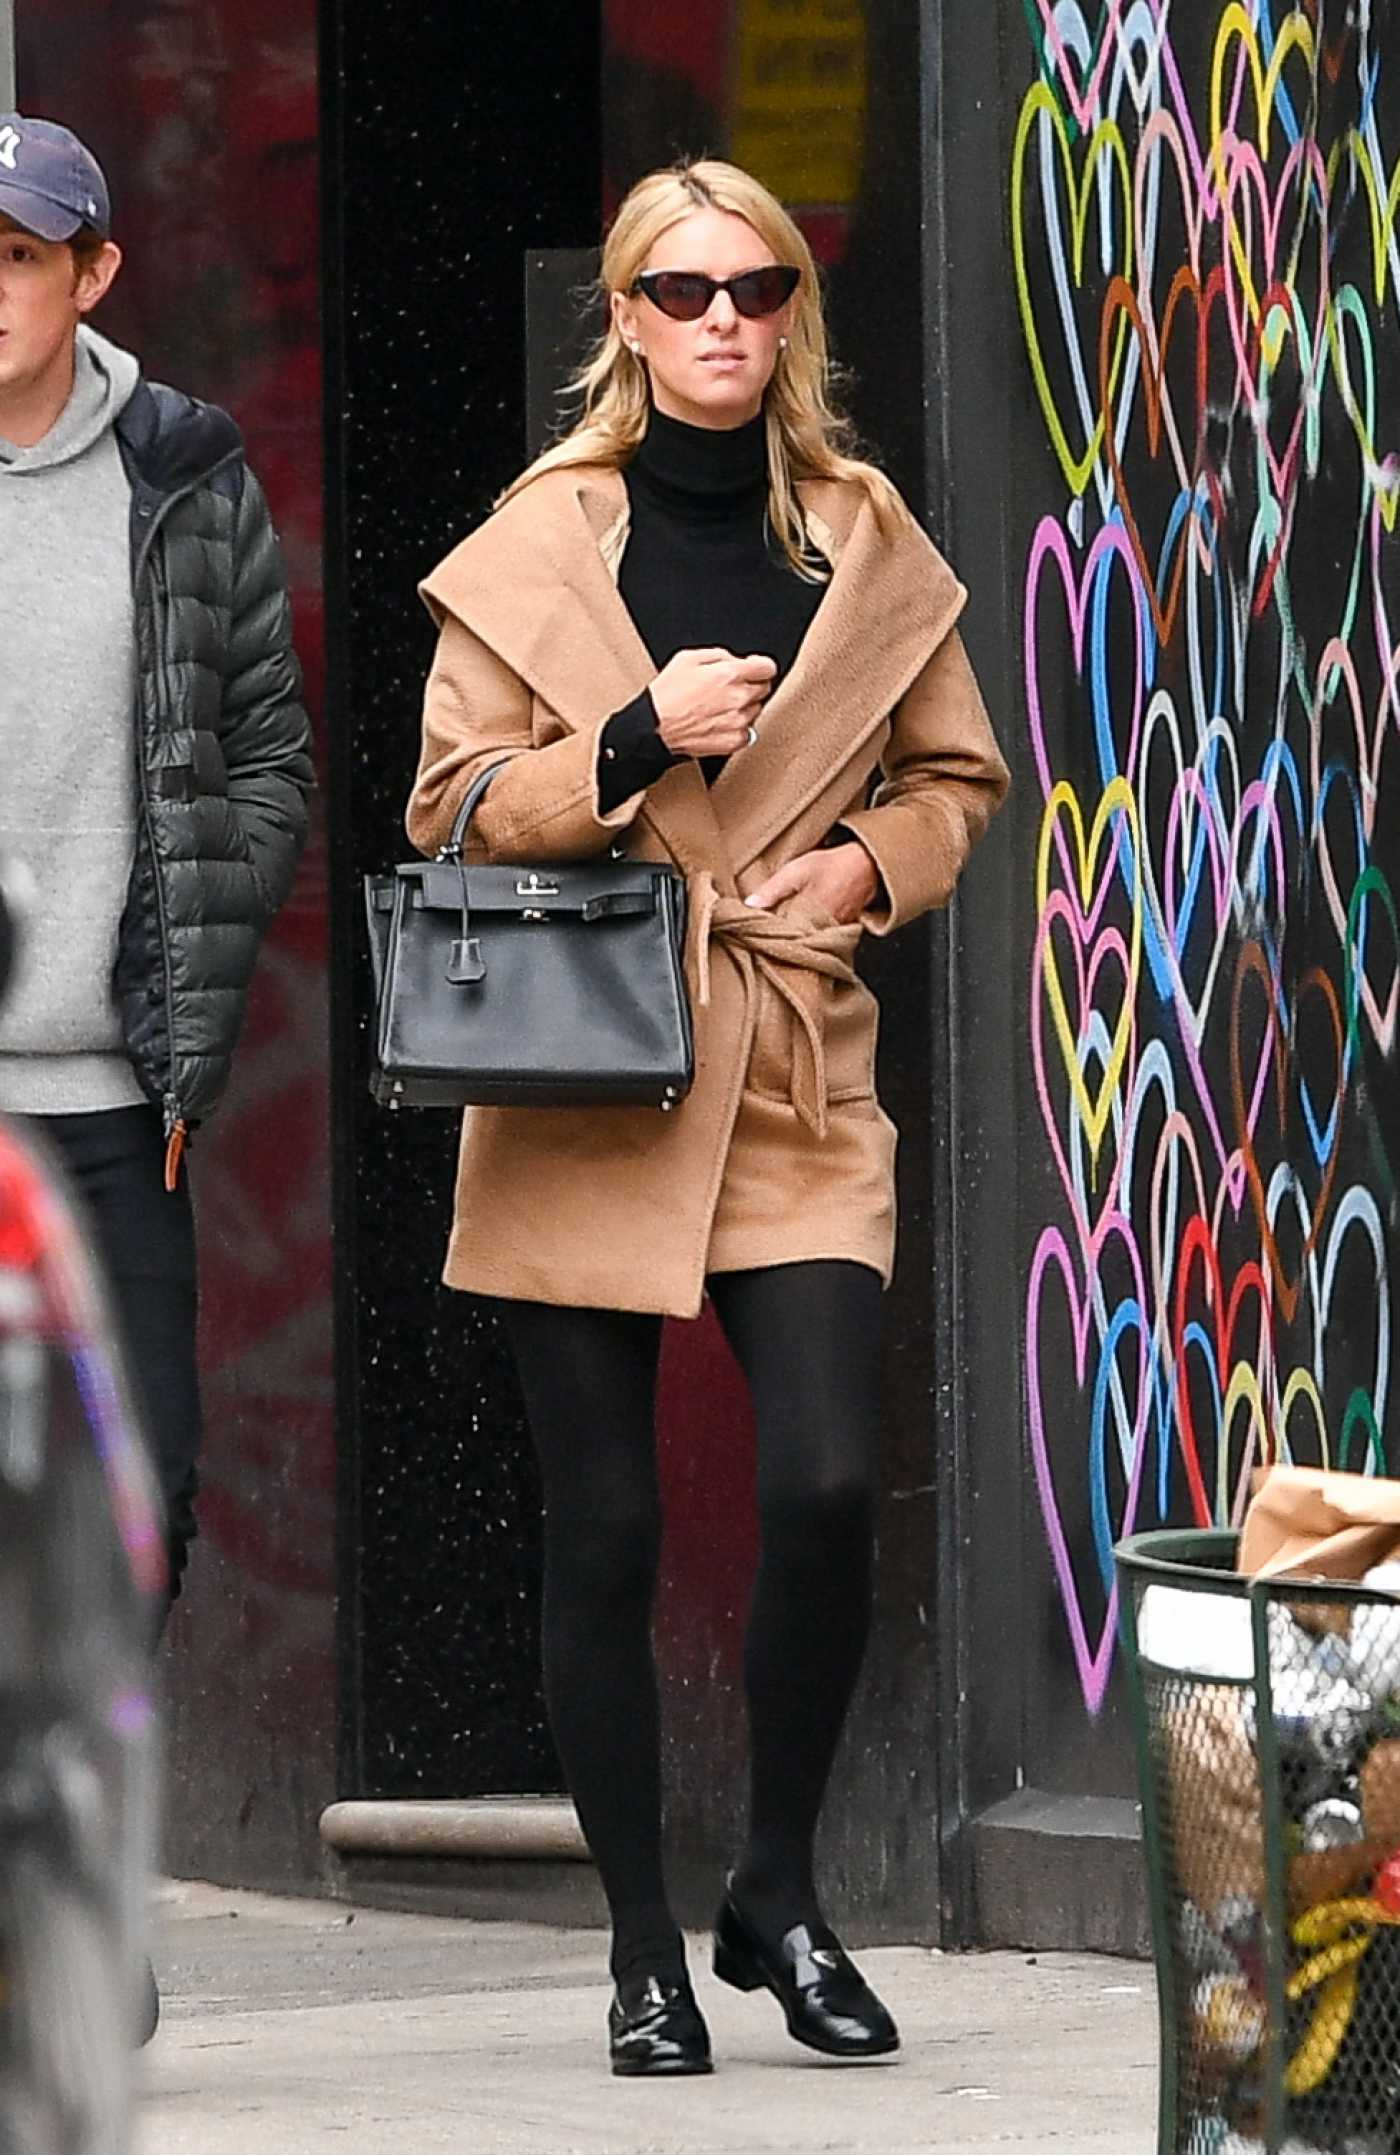 Nicky Hilton in a Tan Jacket Was Seen Out with James Rothschild in New York 10/05/2022